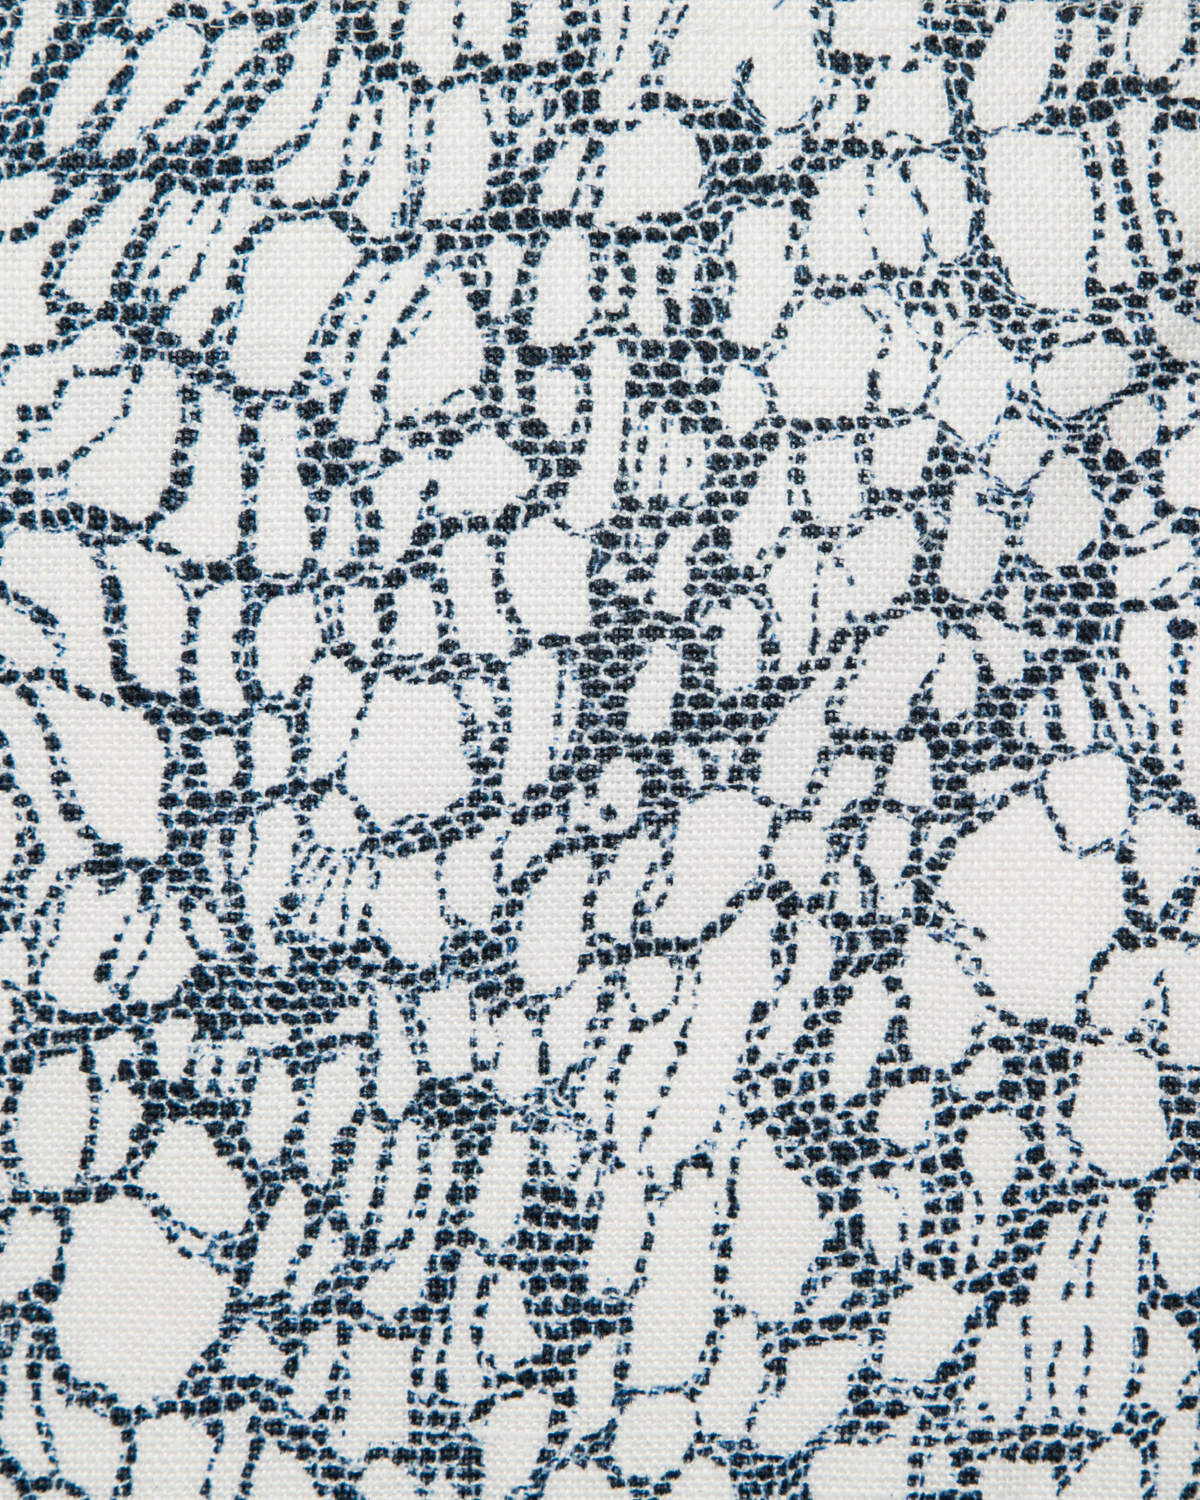 Lace Fabric in Navy